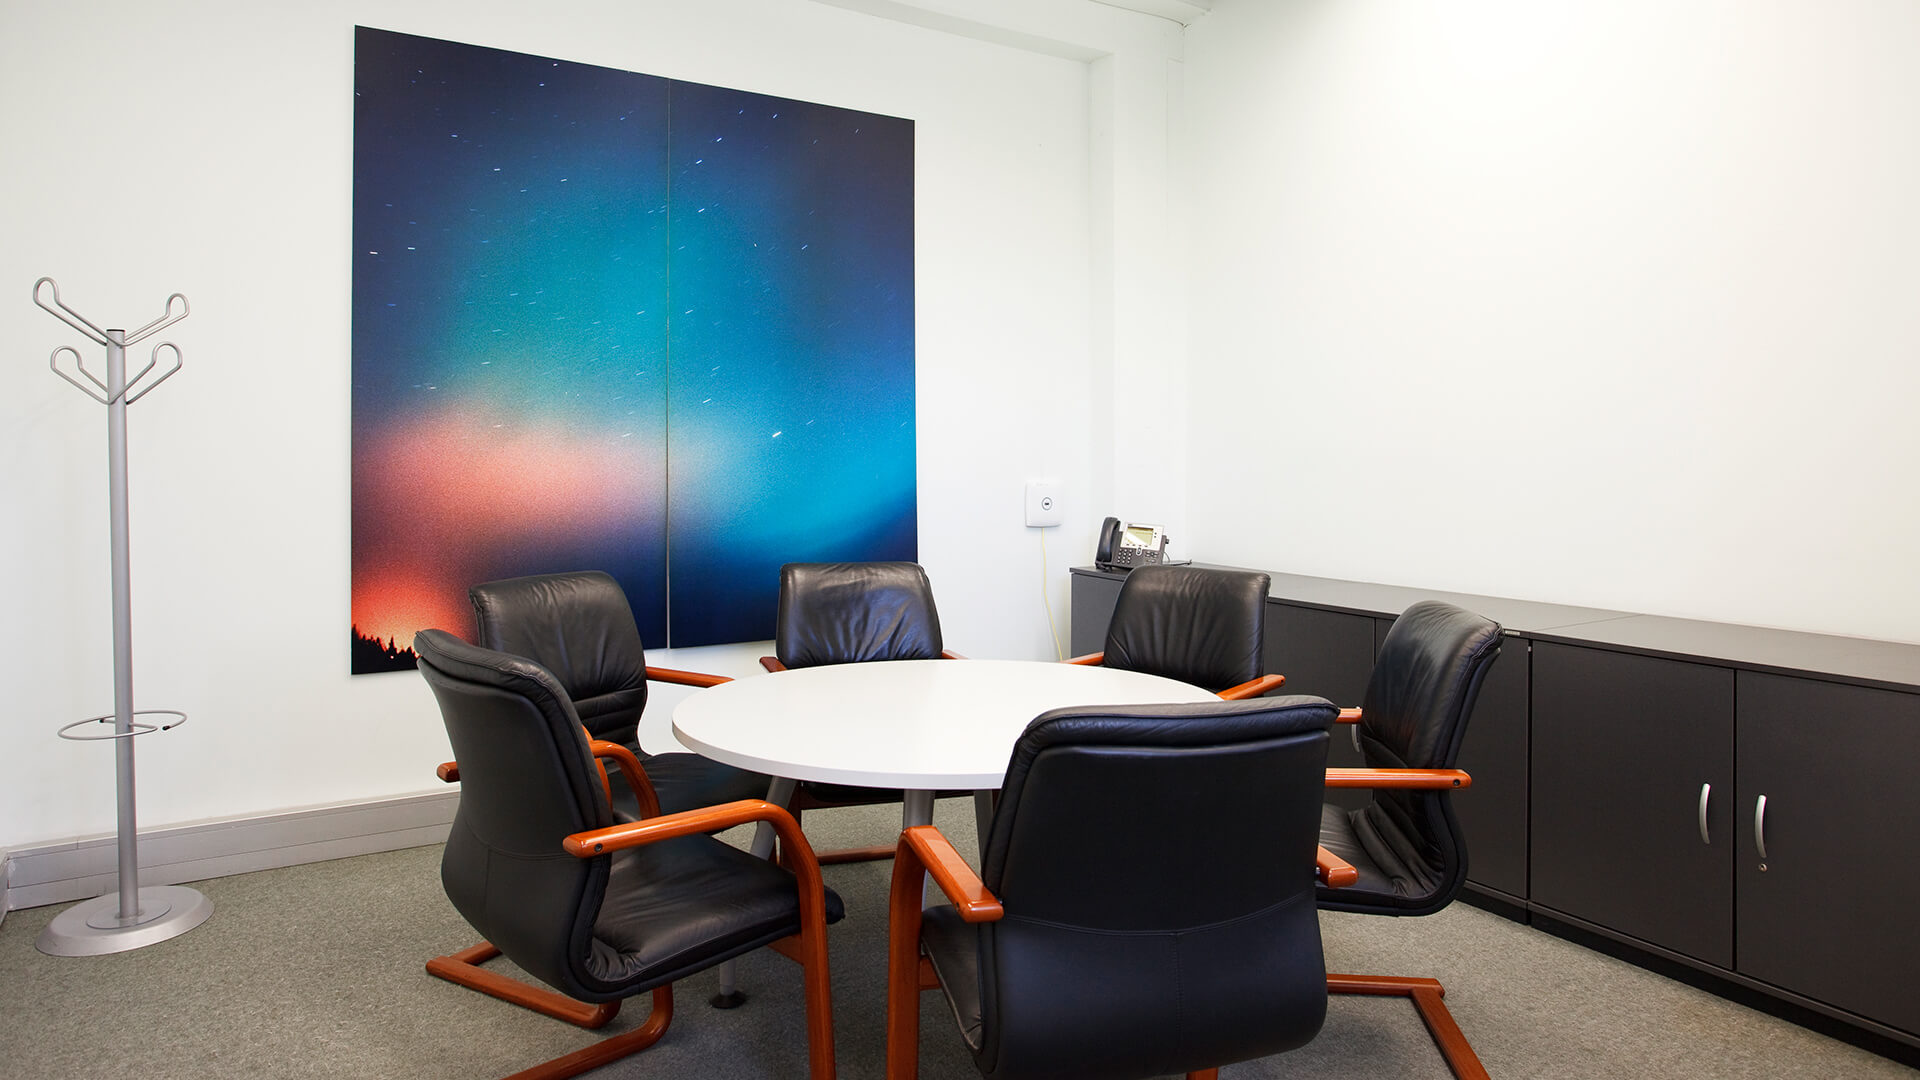 Black padded chairs surround a circular table in a Digital Depot meeting room